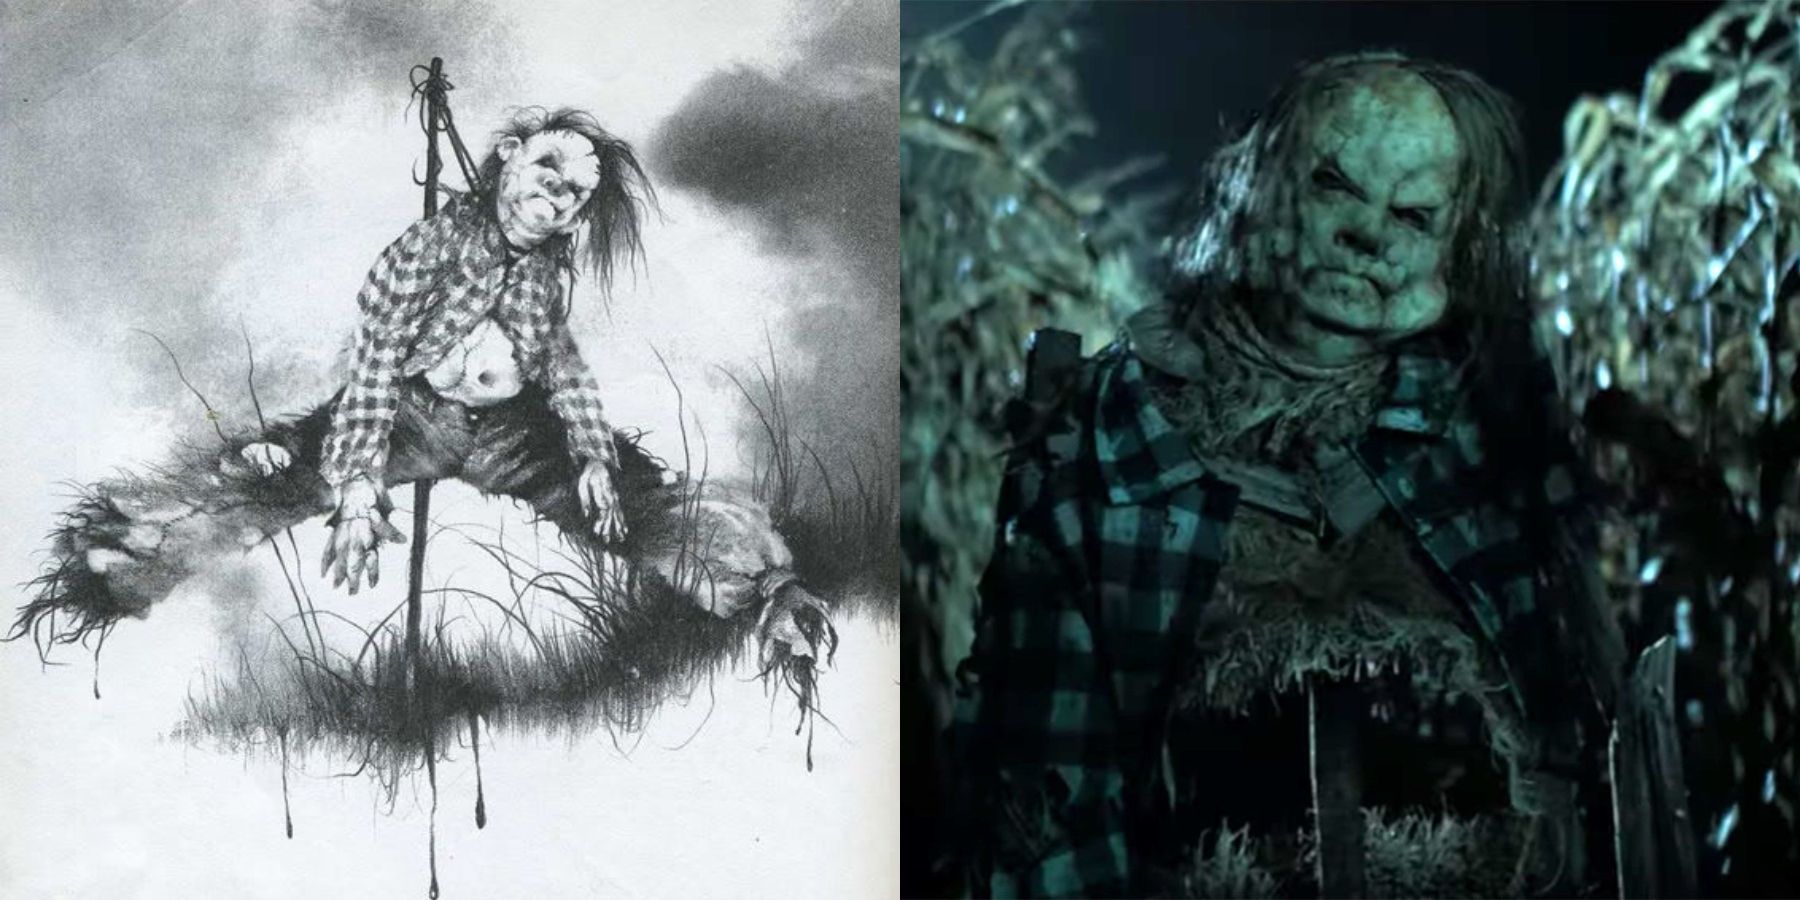 A sketch from the story Harold, and a still from Scary Stories To Tell In The Dark